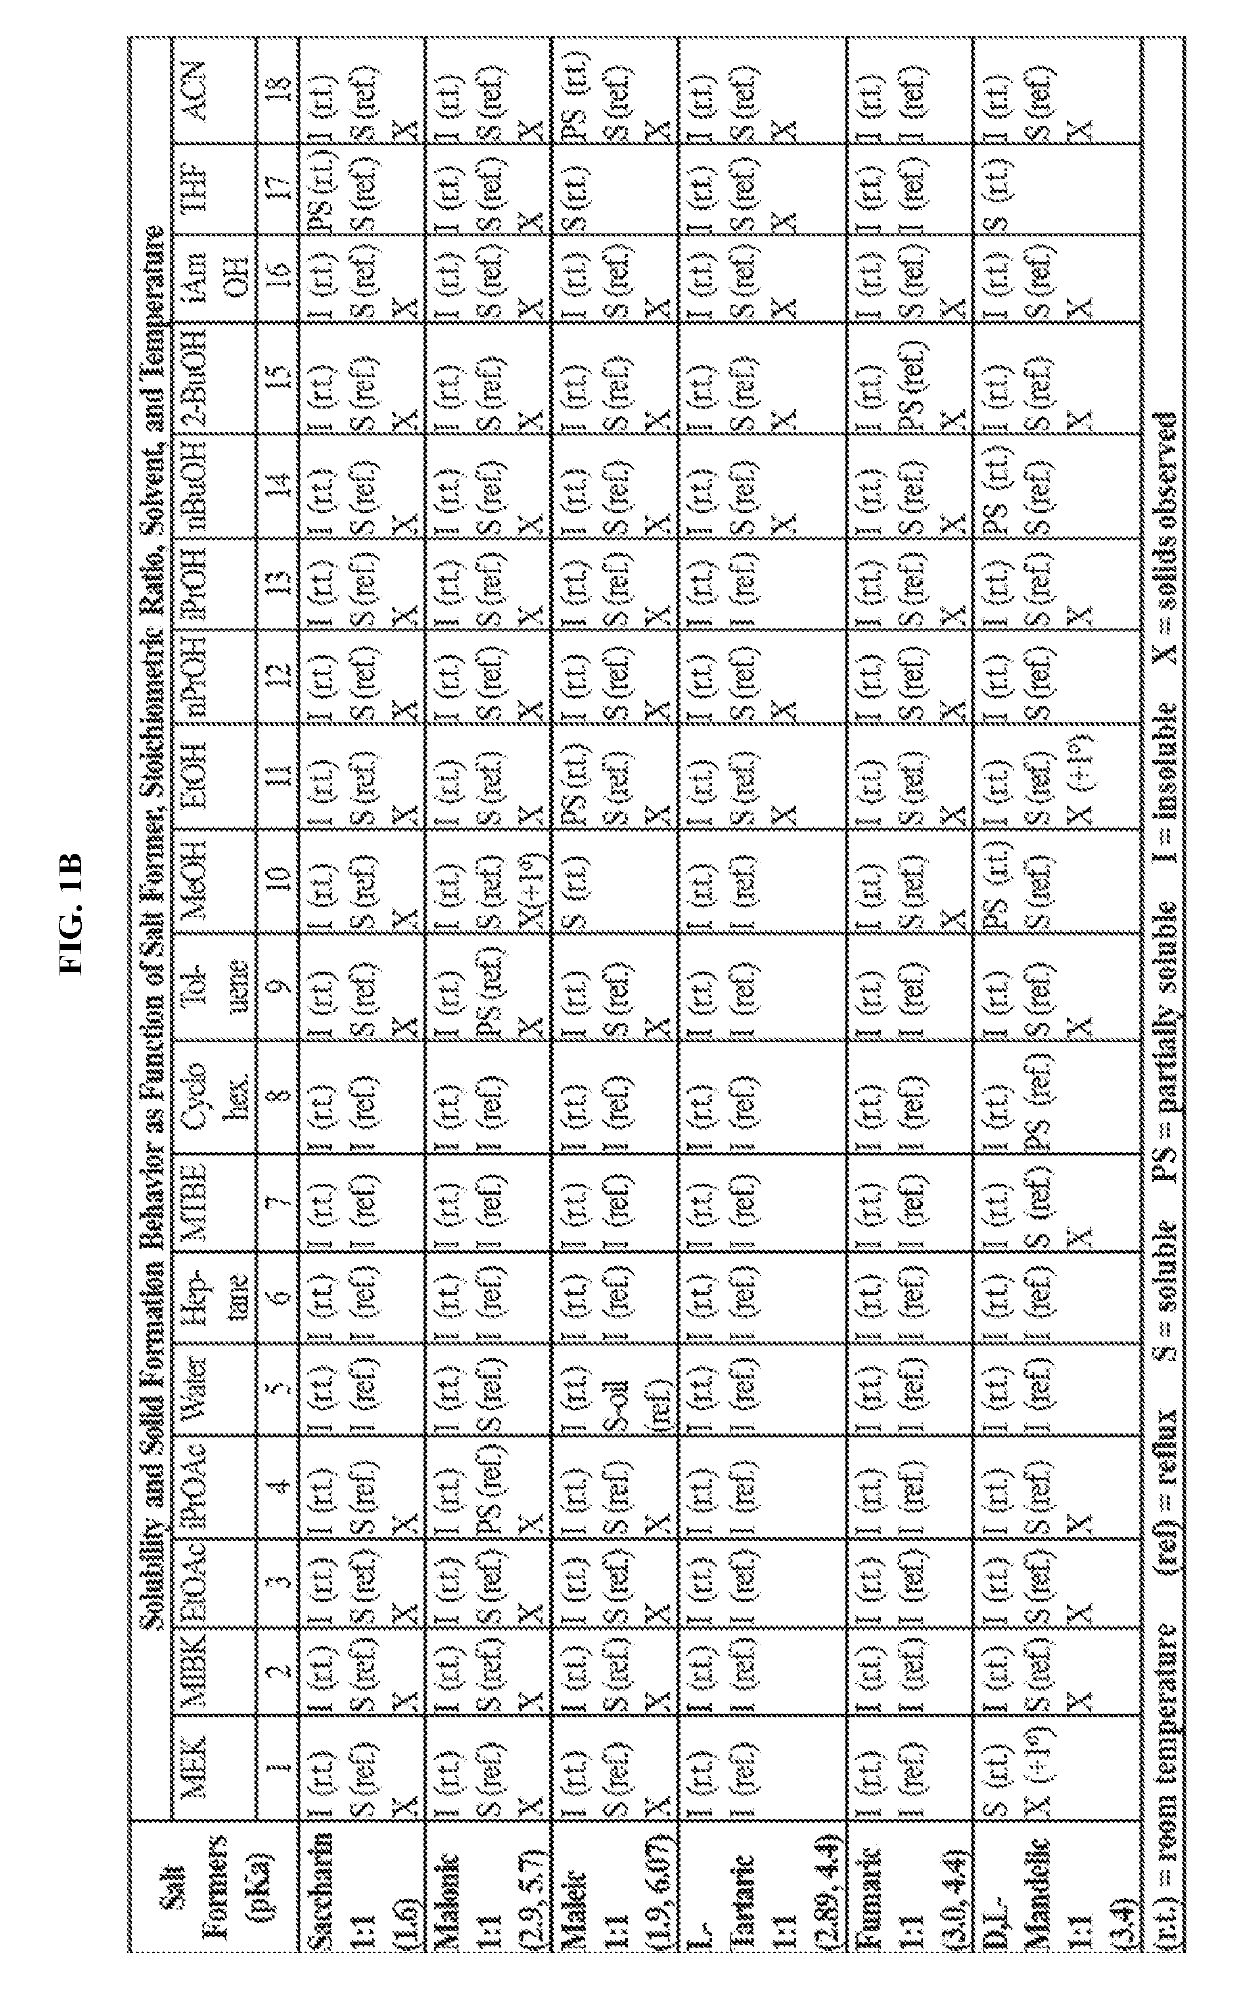 Breathing control modulating compounds, and methods of making and using same